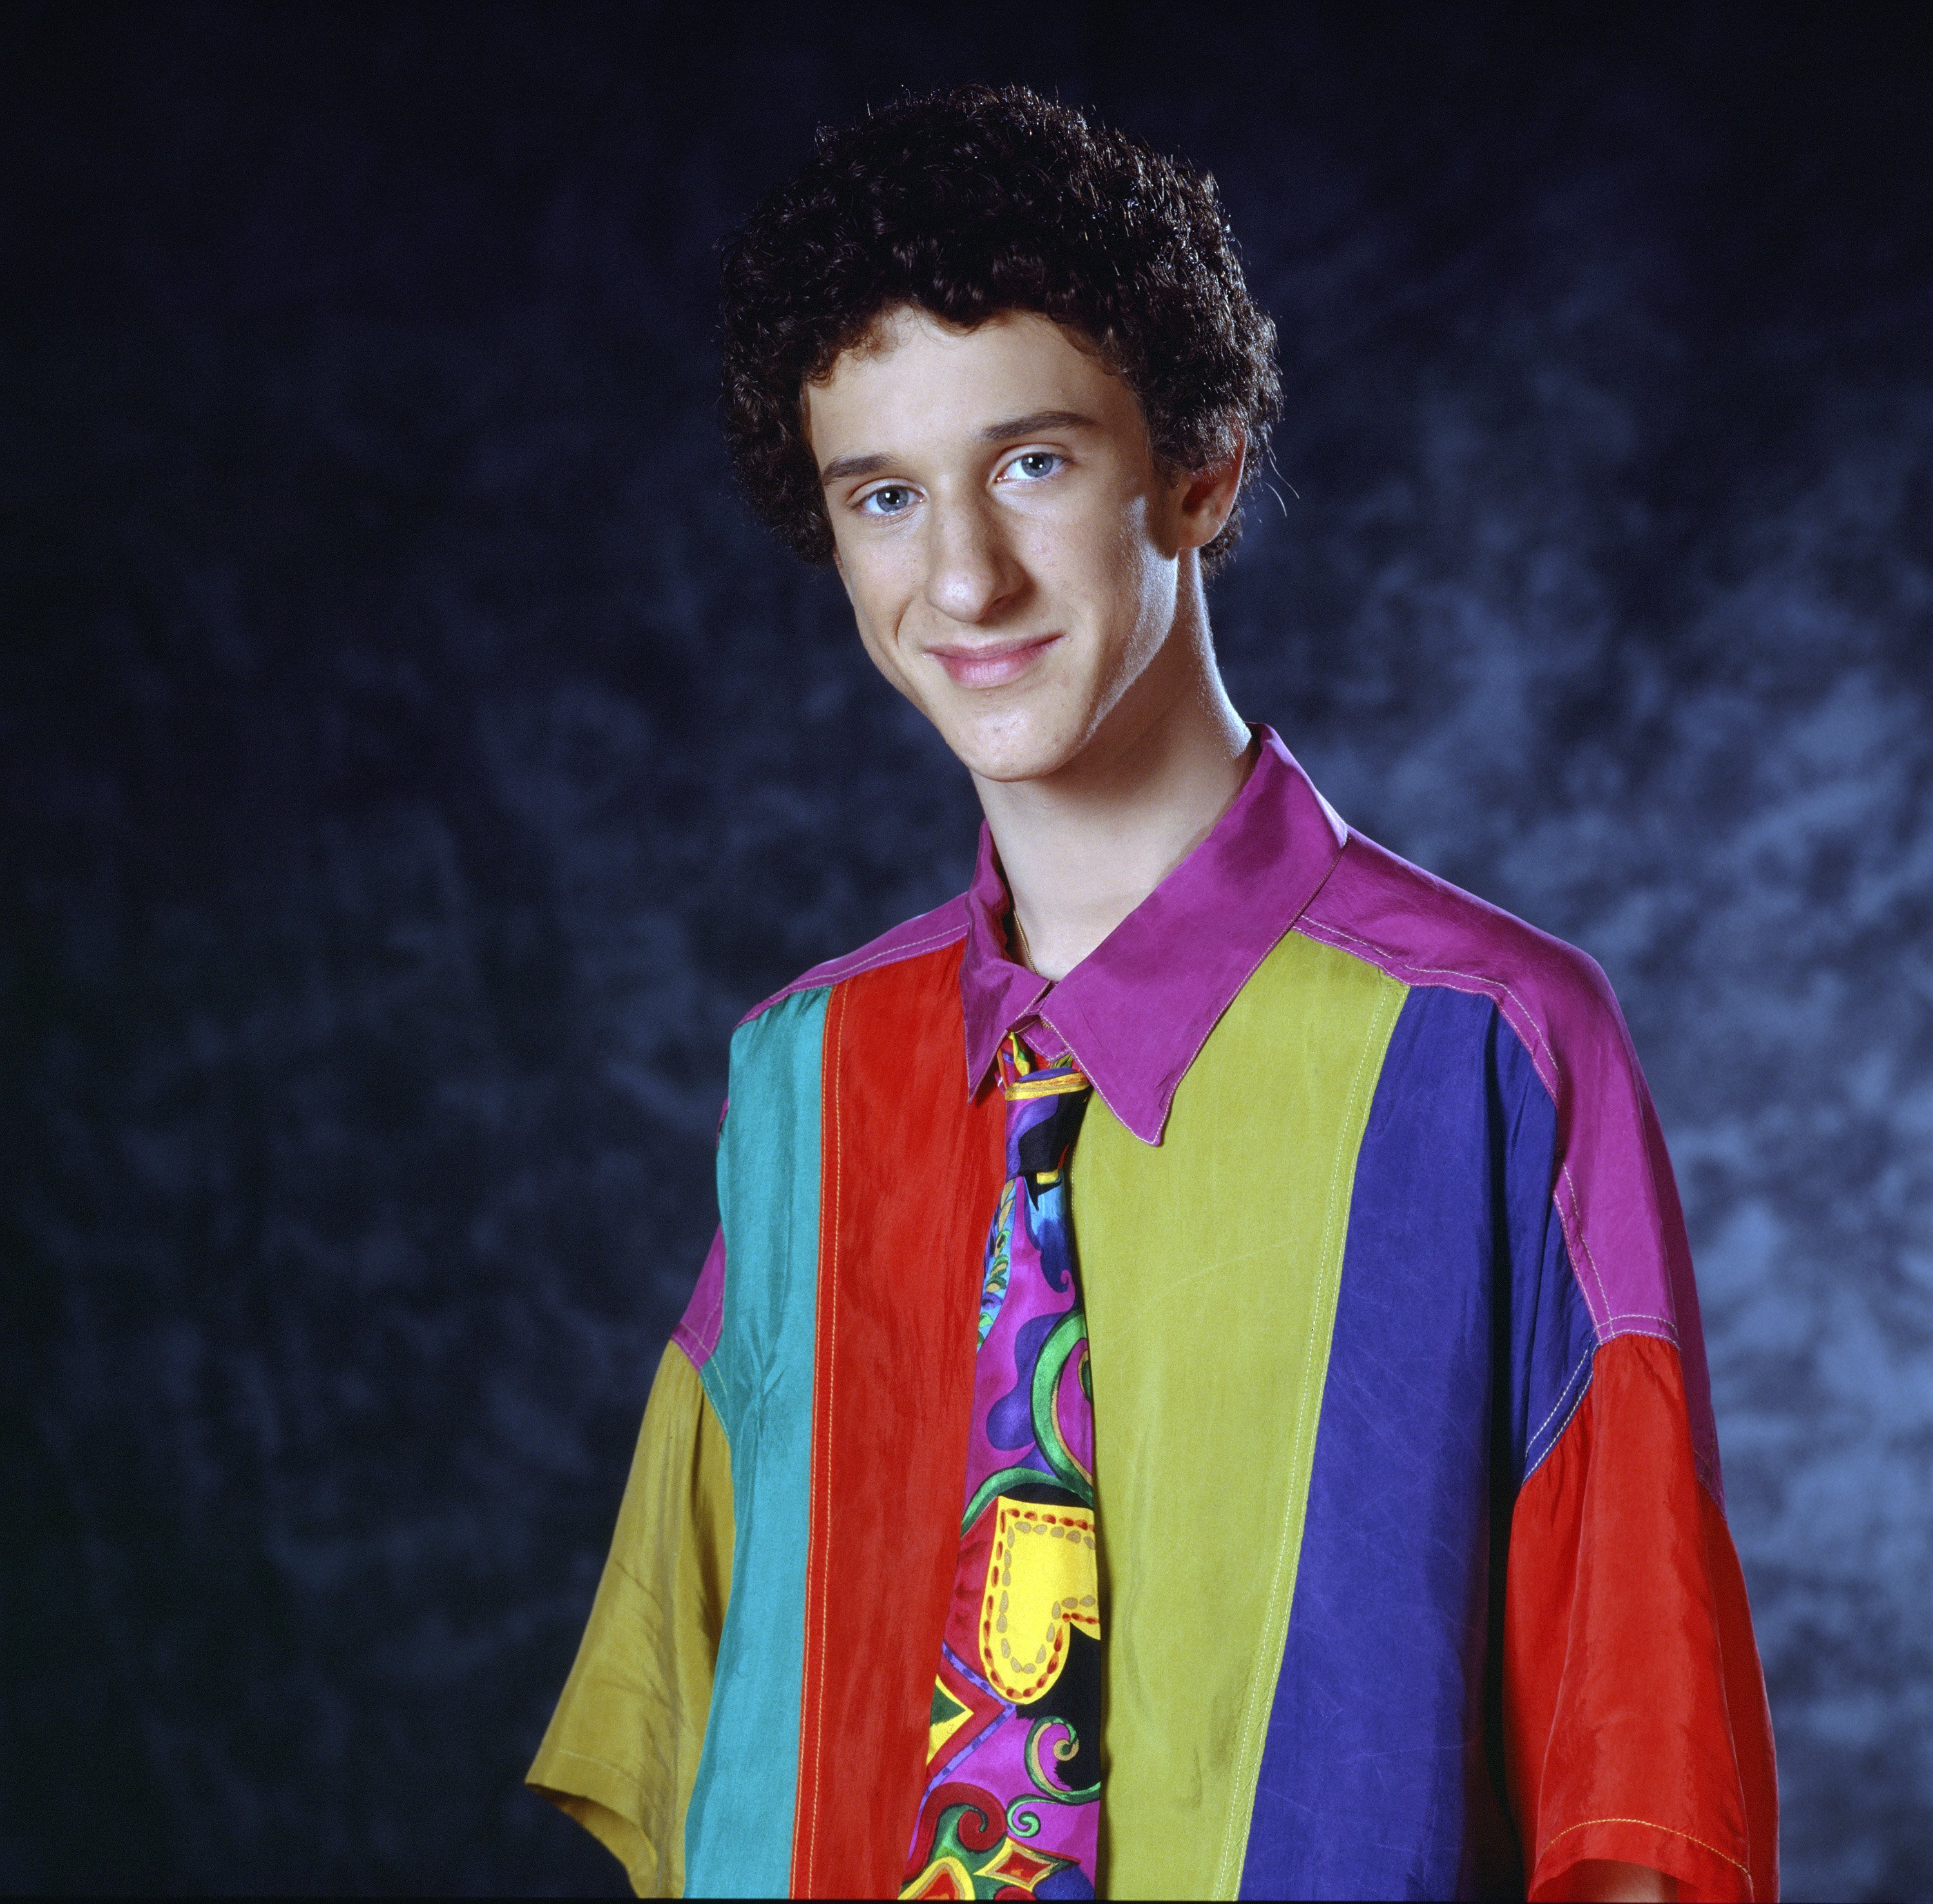  Dustin Diamond as Screech Powers on season 3 of "Saved by the Bell" | Photo by: Chris Haston/NBCU Photo Bank/Getty Images